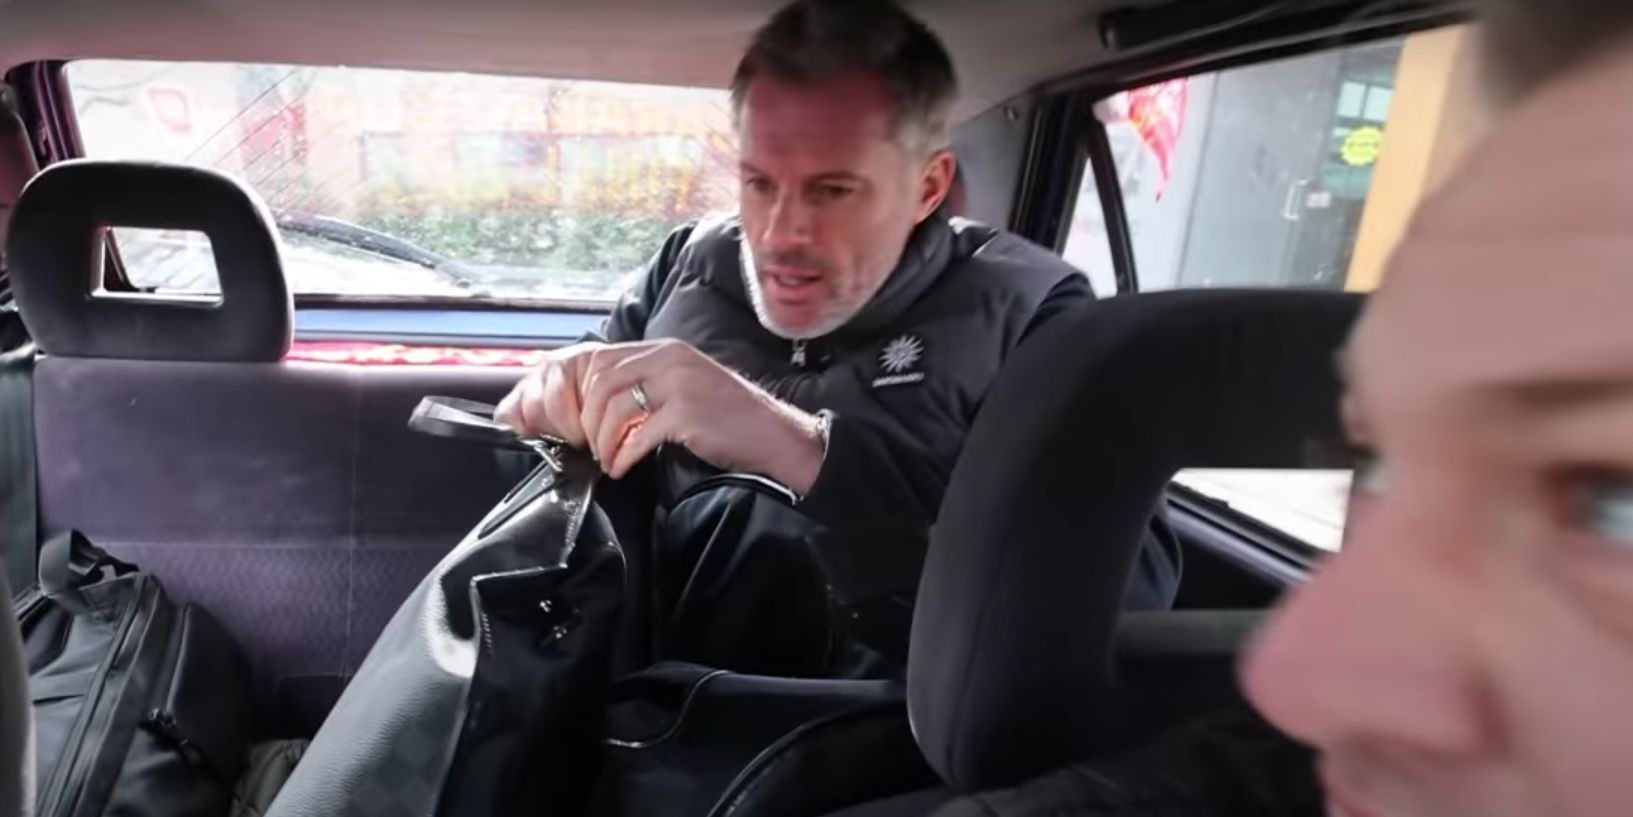 (Video) Jamie Carragher joins two Liverpool fans in their £40 car, driving from Melwood to Wembley